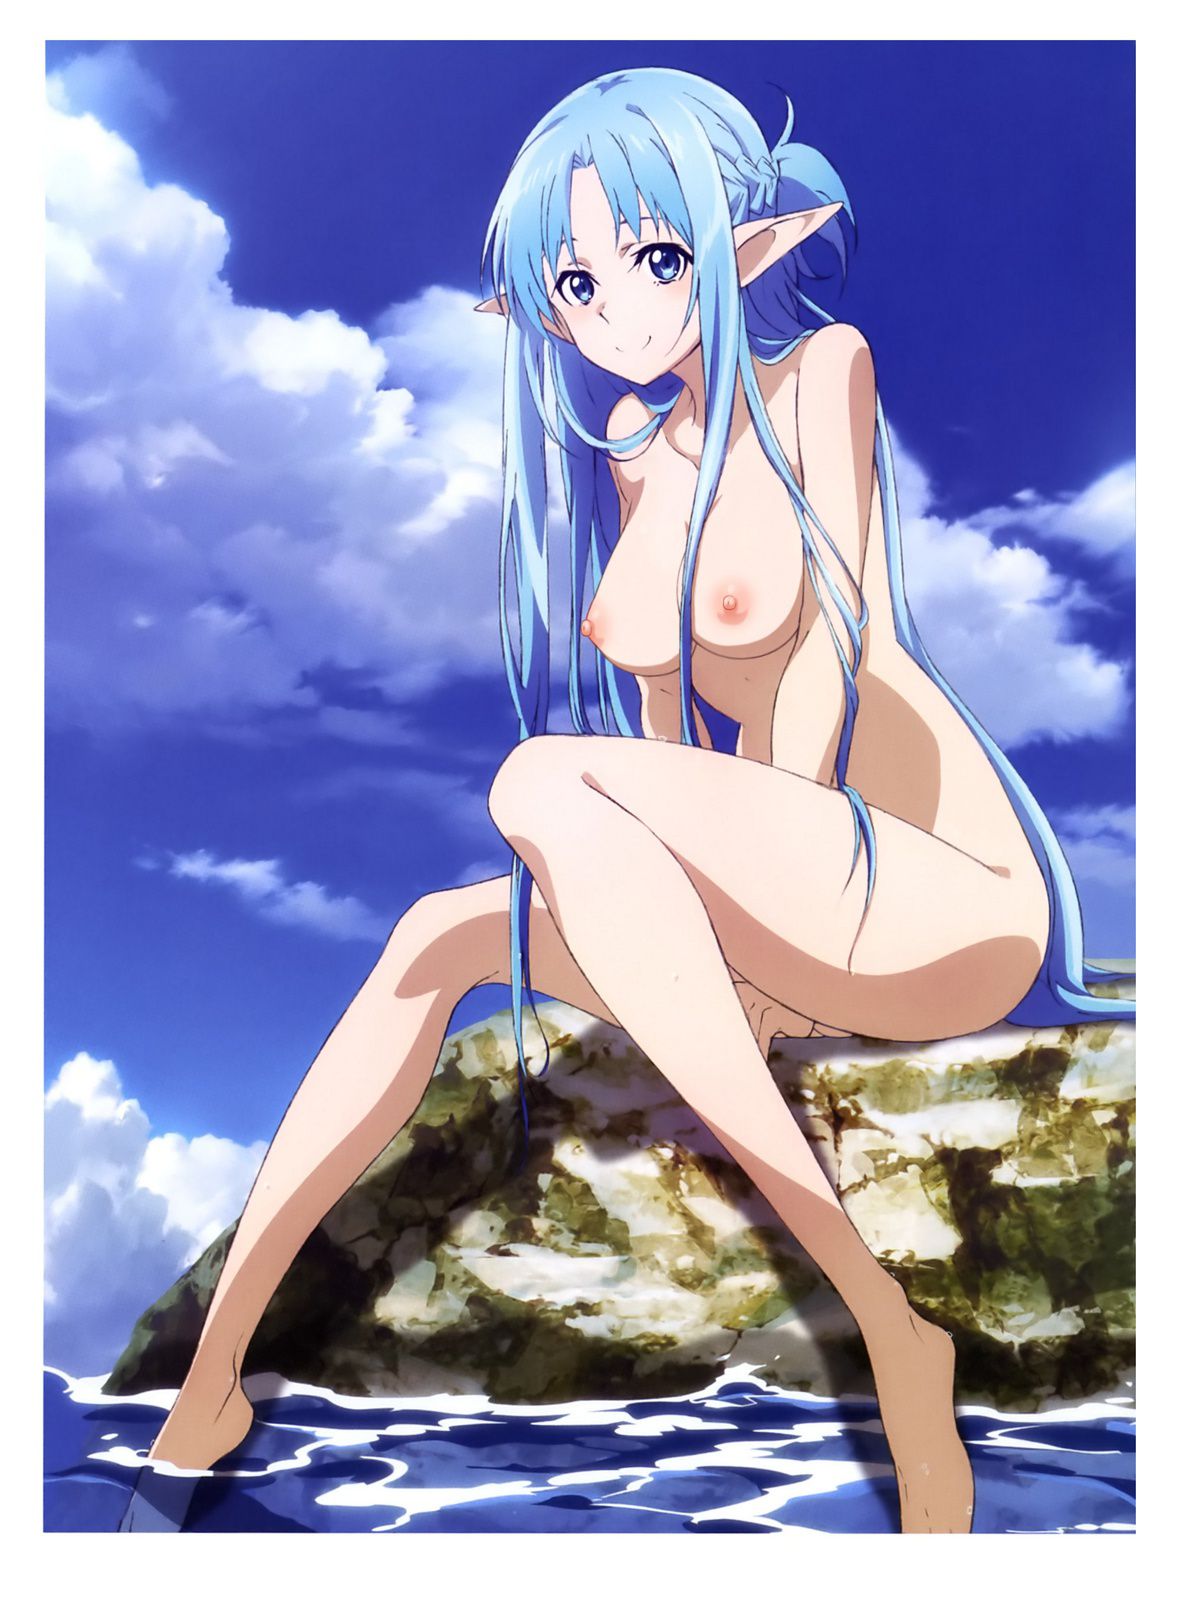 【Secondary Erotic】 Sword Art Online Stripped Coraello images of heroines appearing are here 2